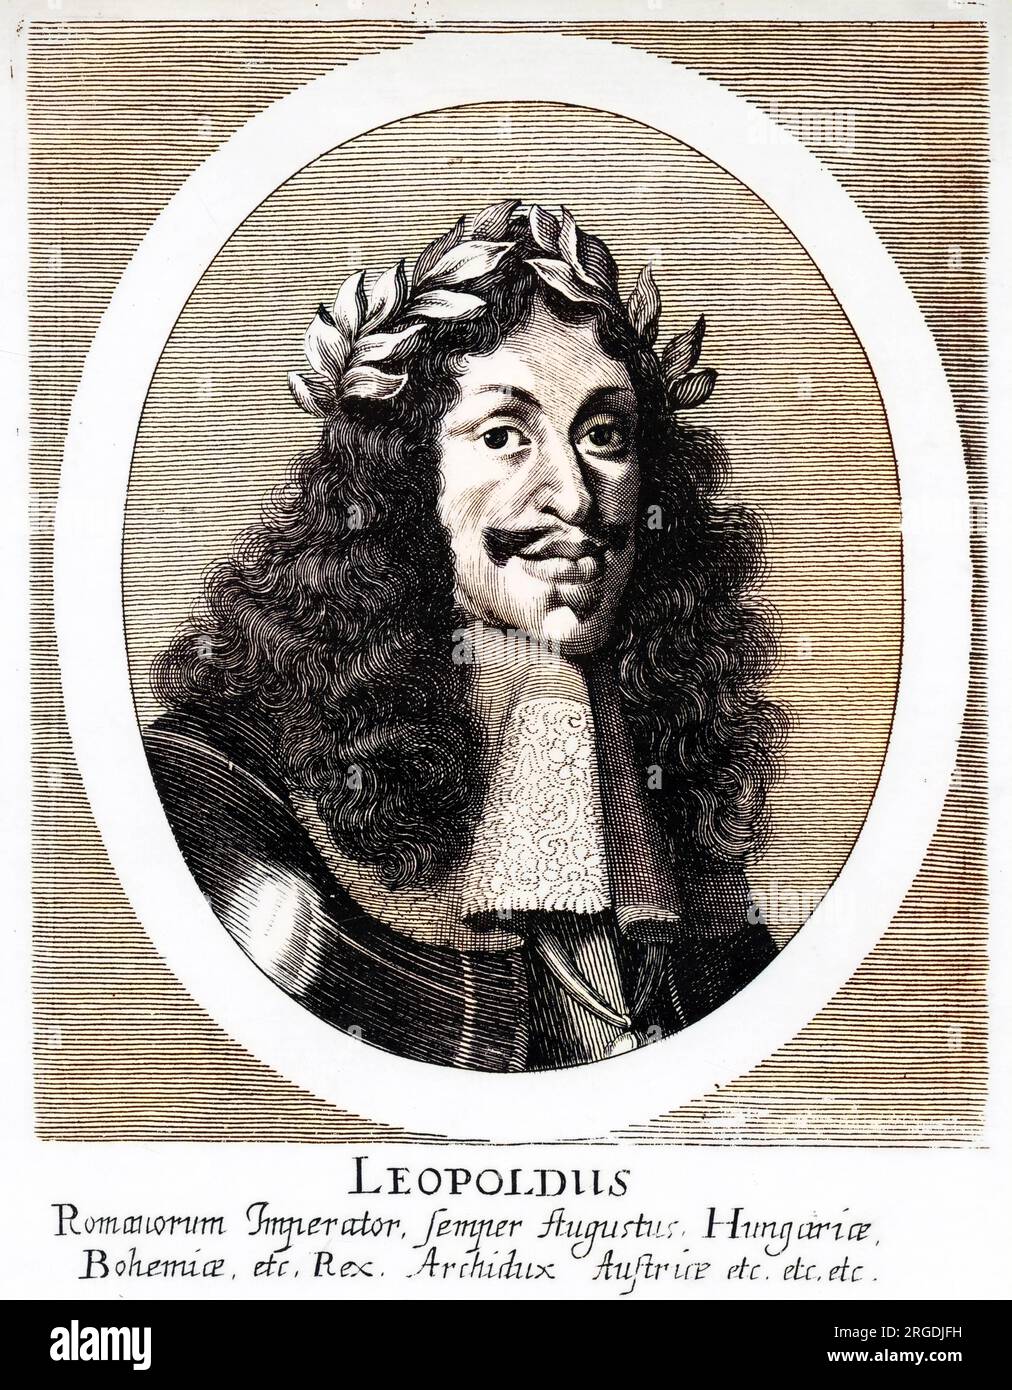 Leopold I (1640¹1705) - Holy Roman Emperor, King of Hungary and King of Bohemia. A member of the Habsburg family, he was the second son of Emperor Ferdinand III and his first wife, Maria Anna of Spain. Stock Photo